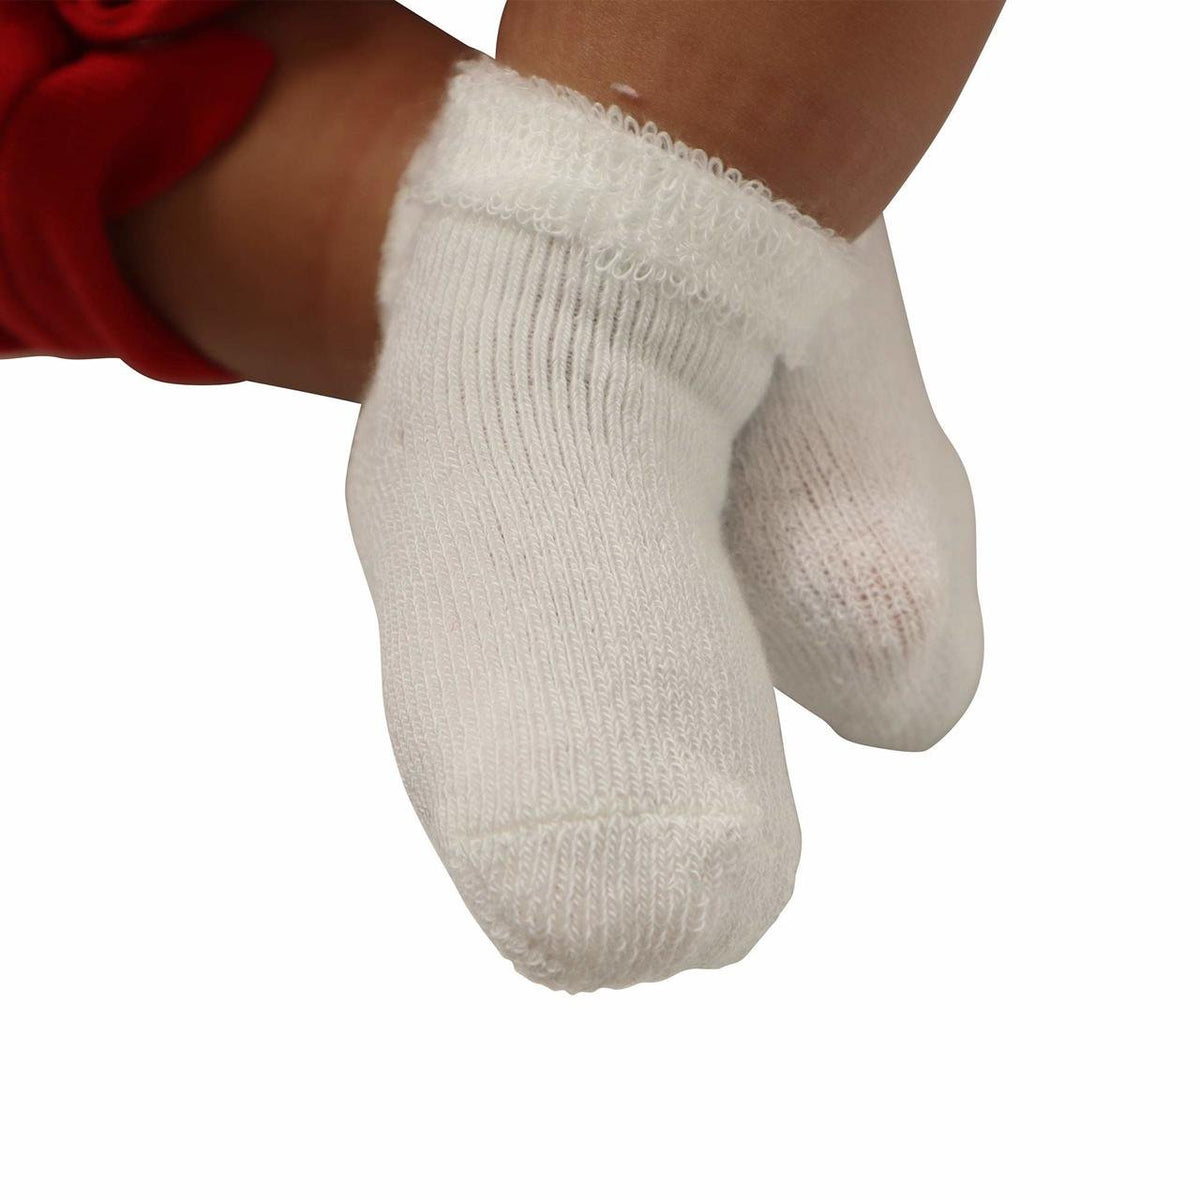 Comfort Warming Infant Newborn Baby Booties -  Terry Cloth - White - Mars Med Supply